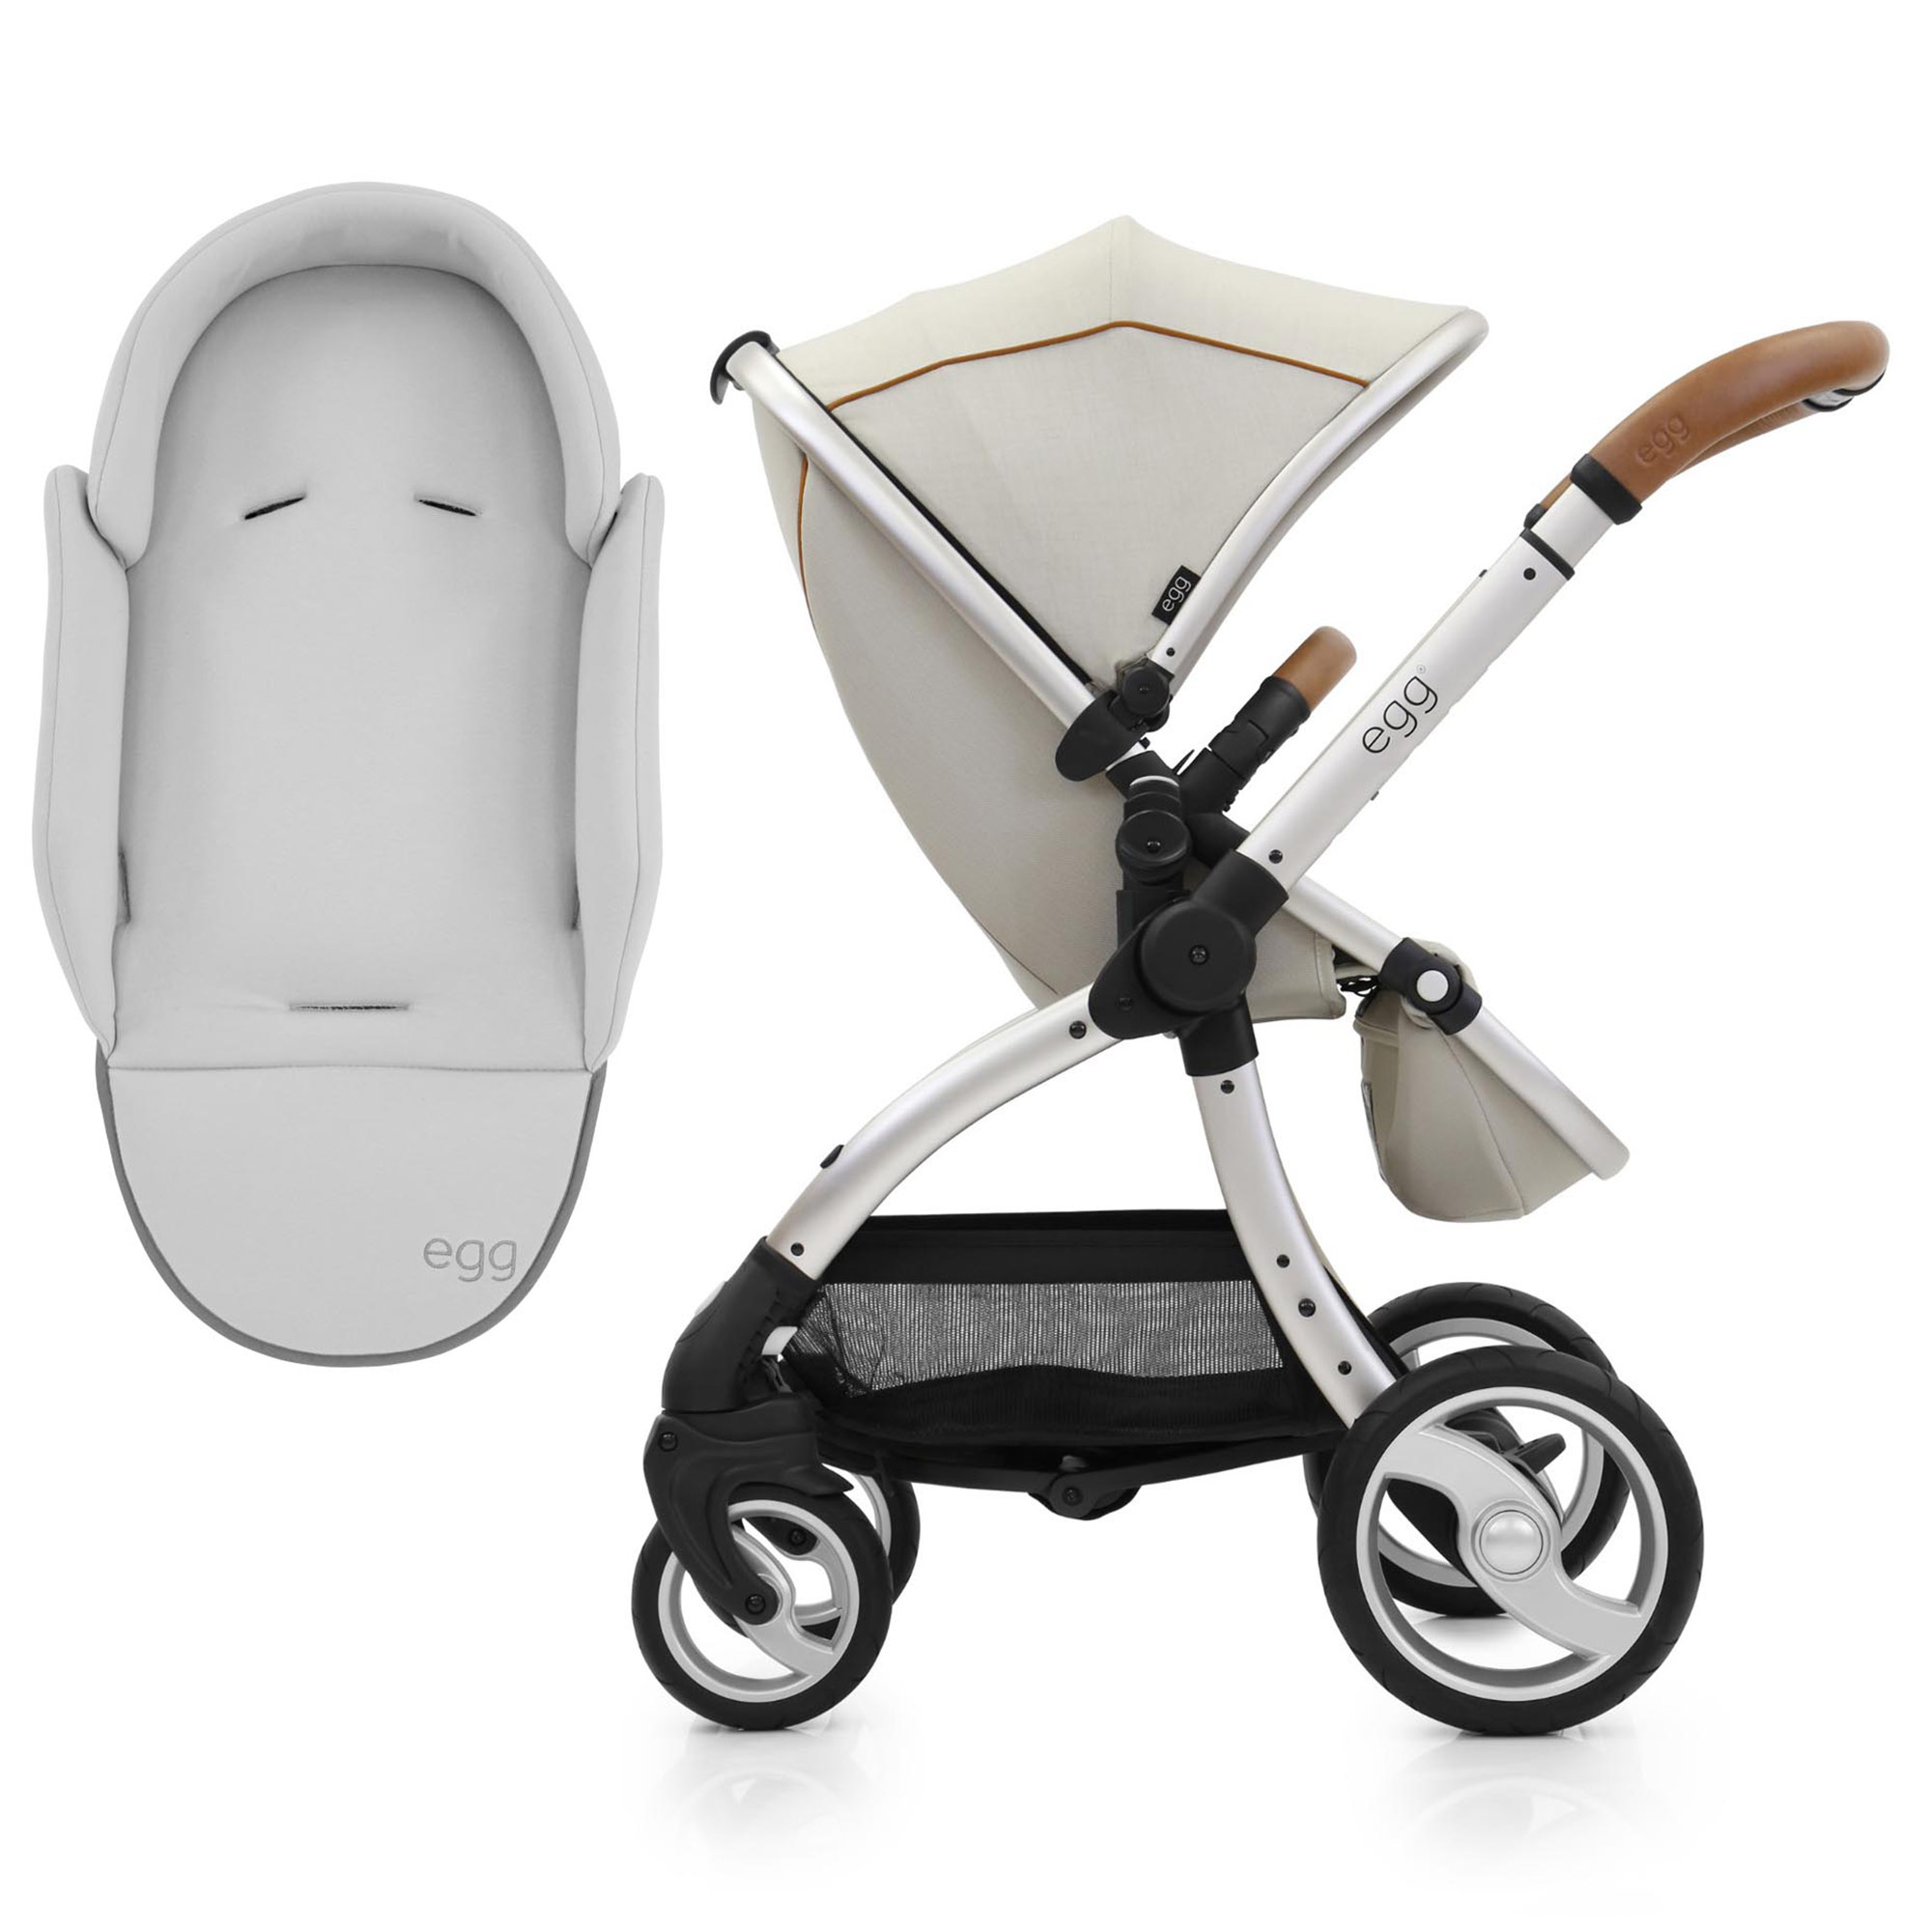 egg buggy accessories